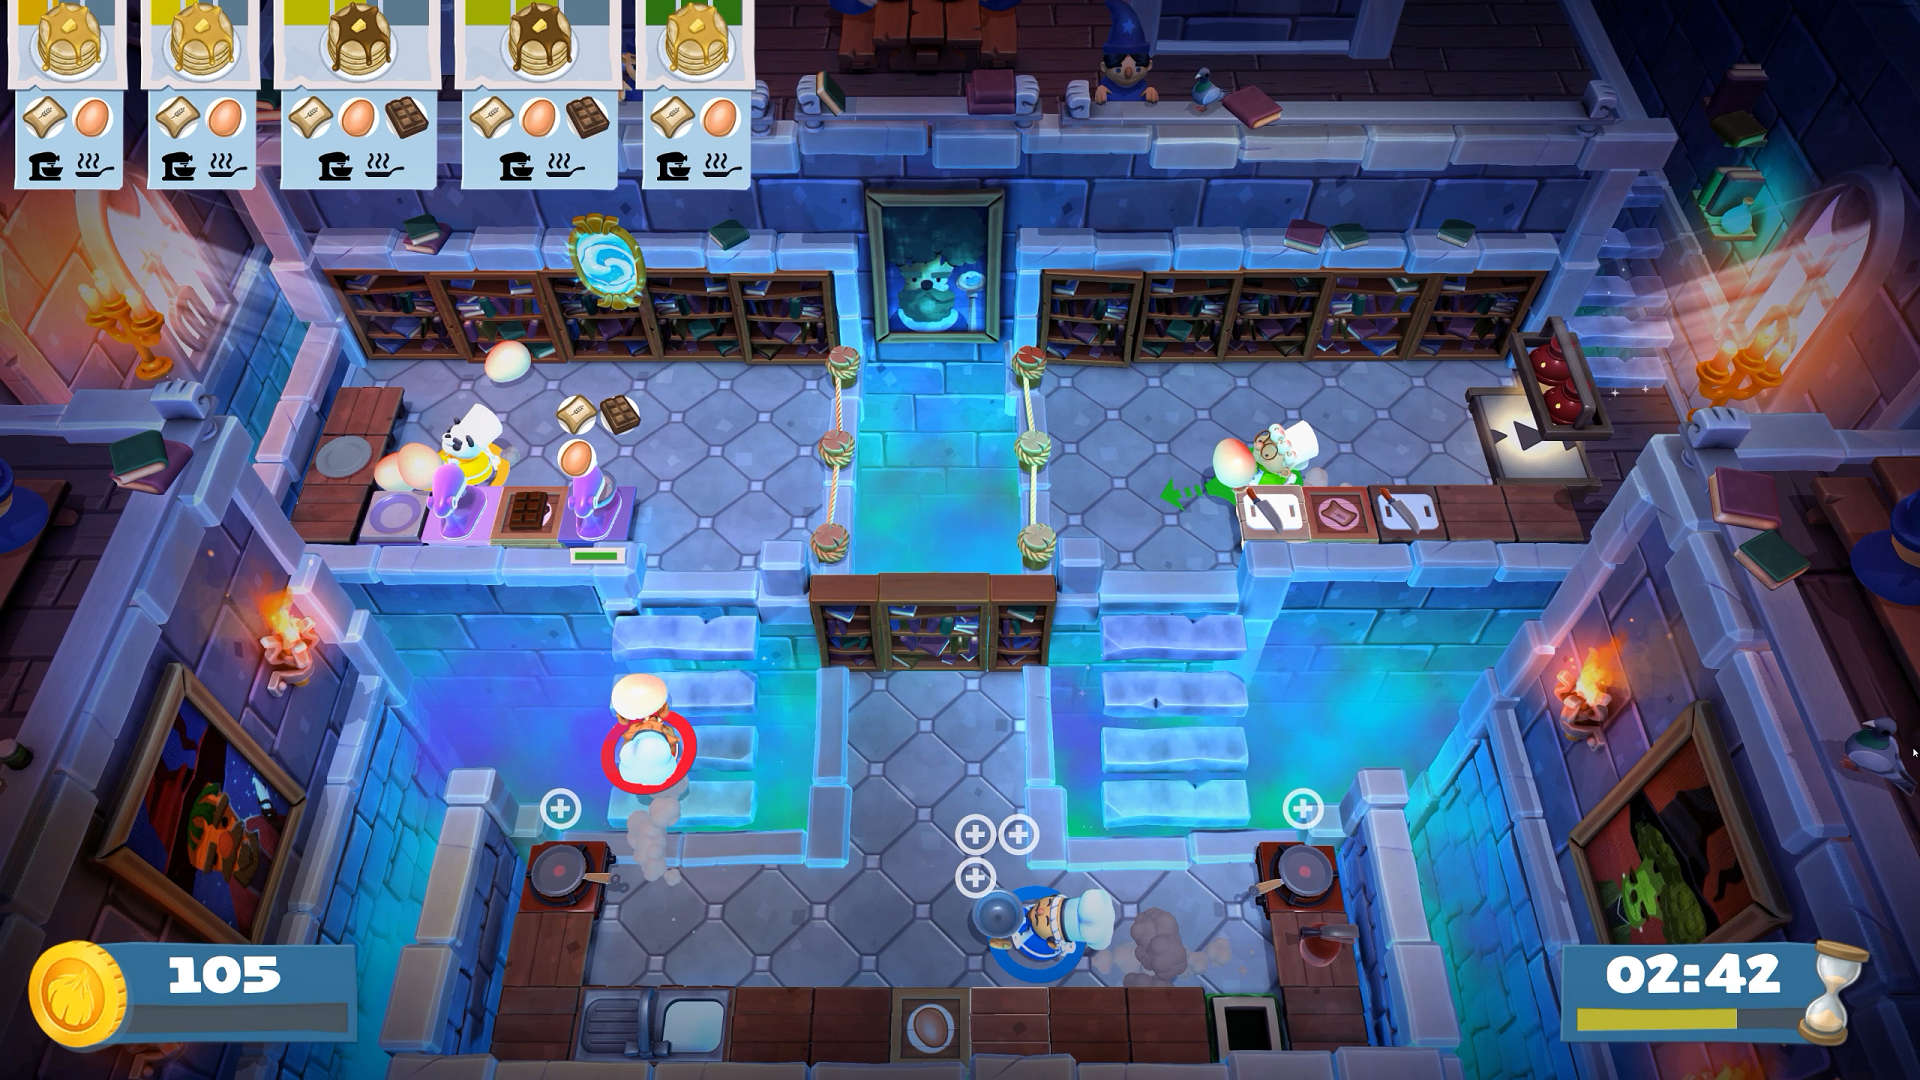 ps4 overcooked 2 price